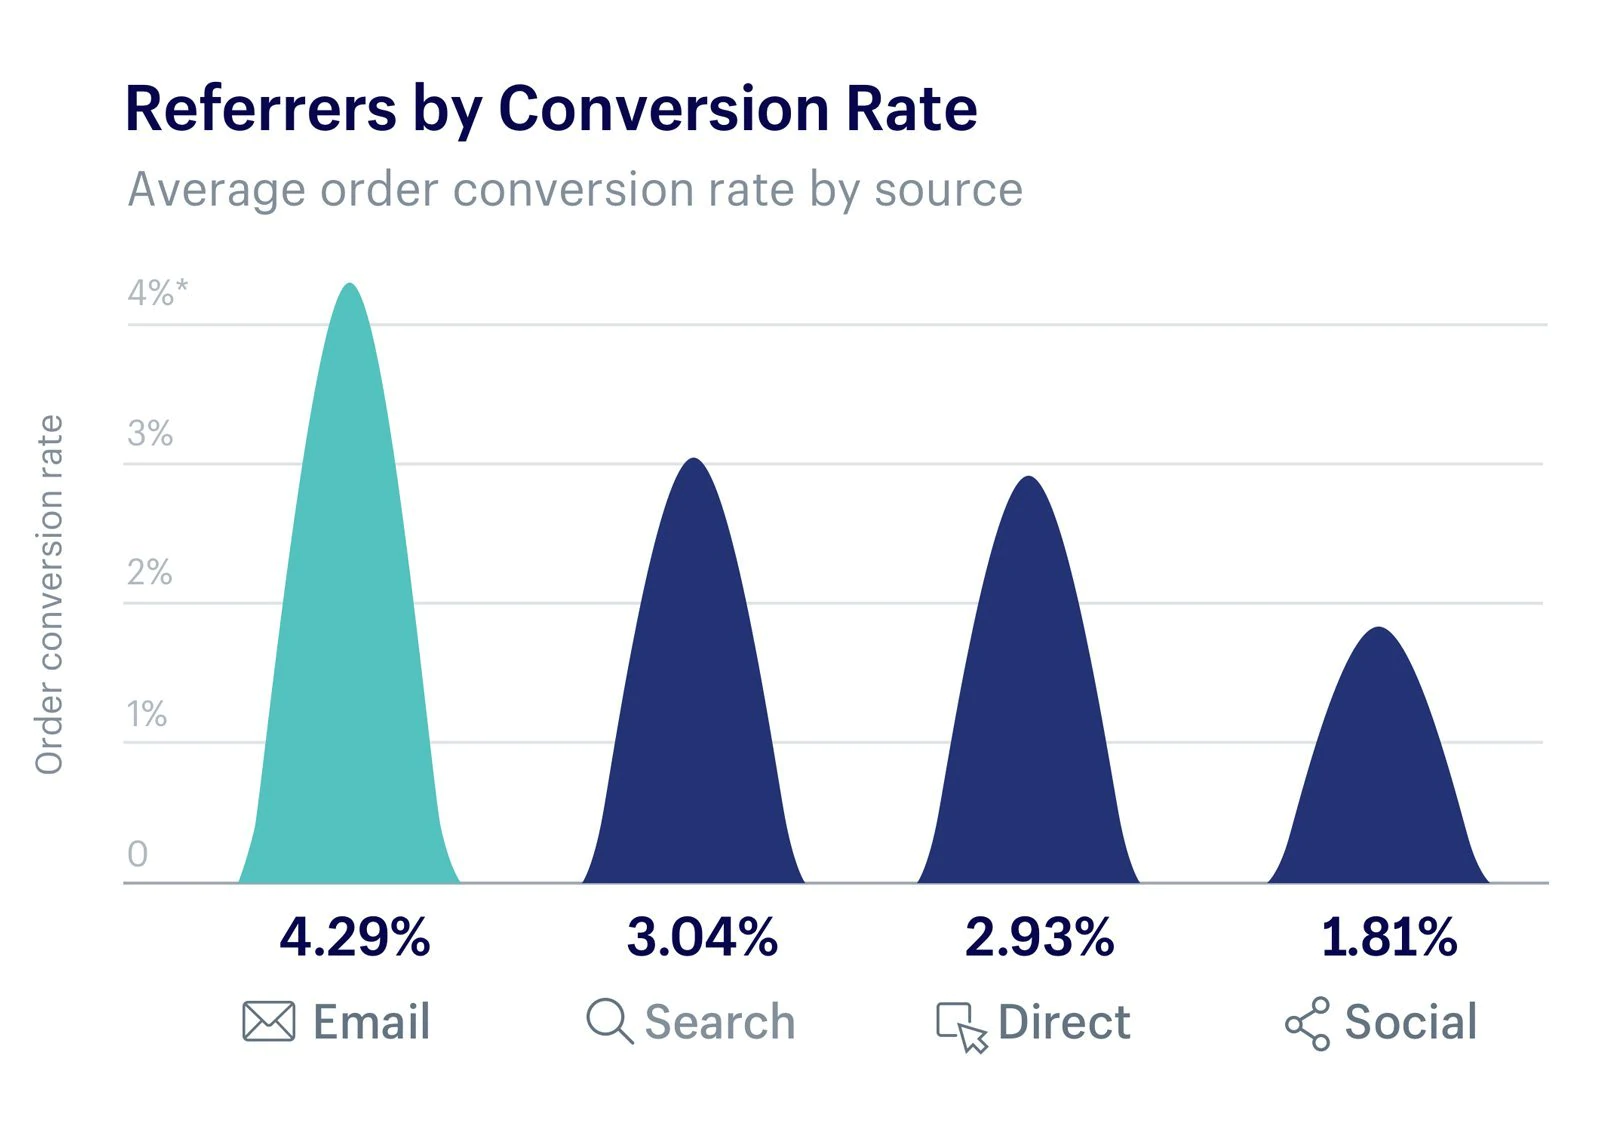 Graph of Shopify data showing that email has the highest conversion rate over other channels